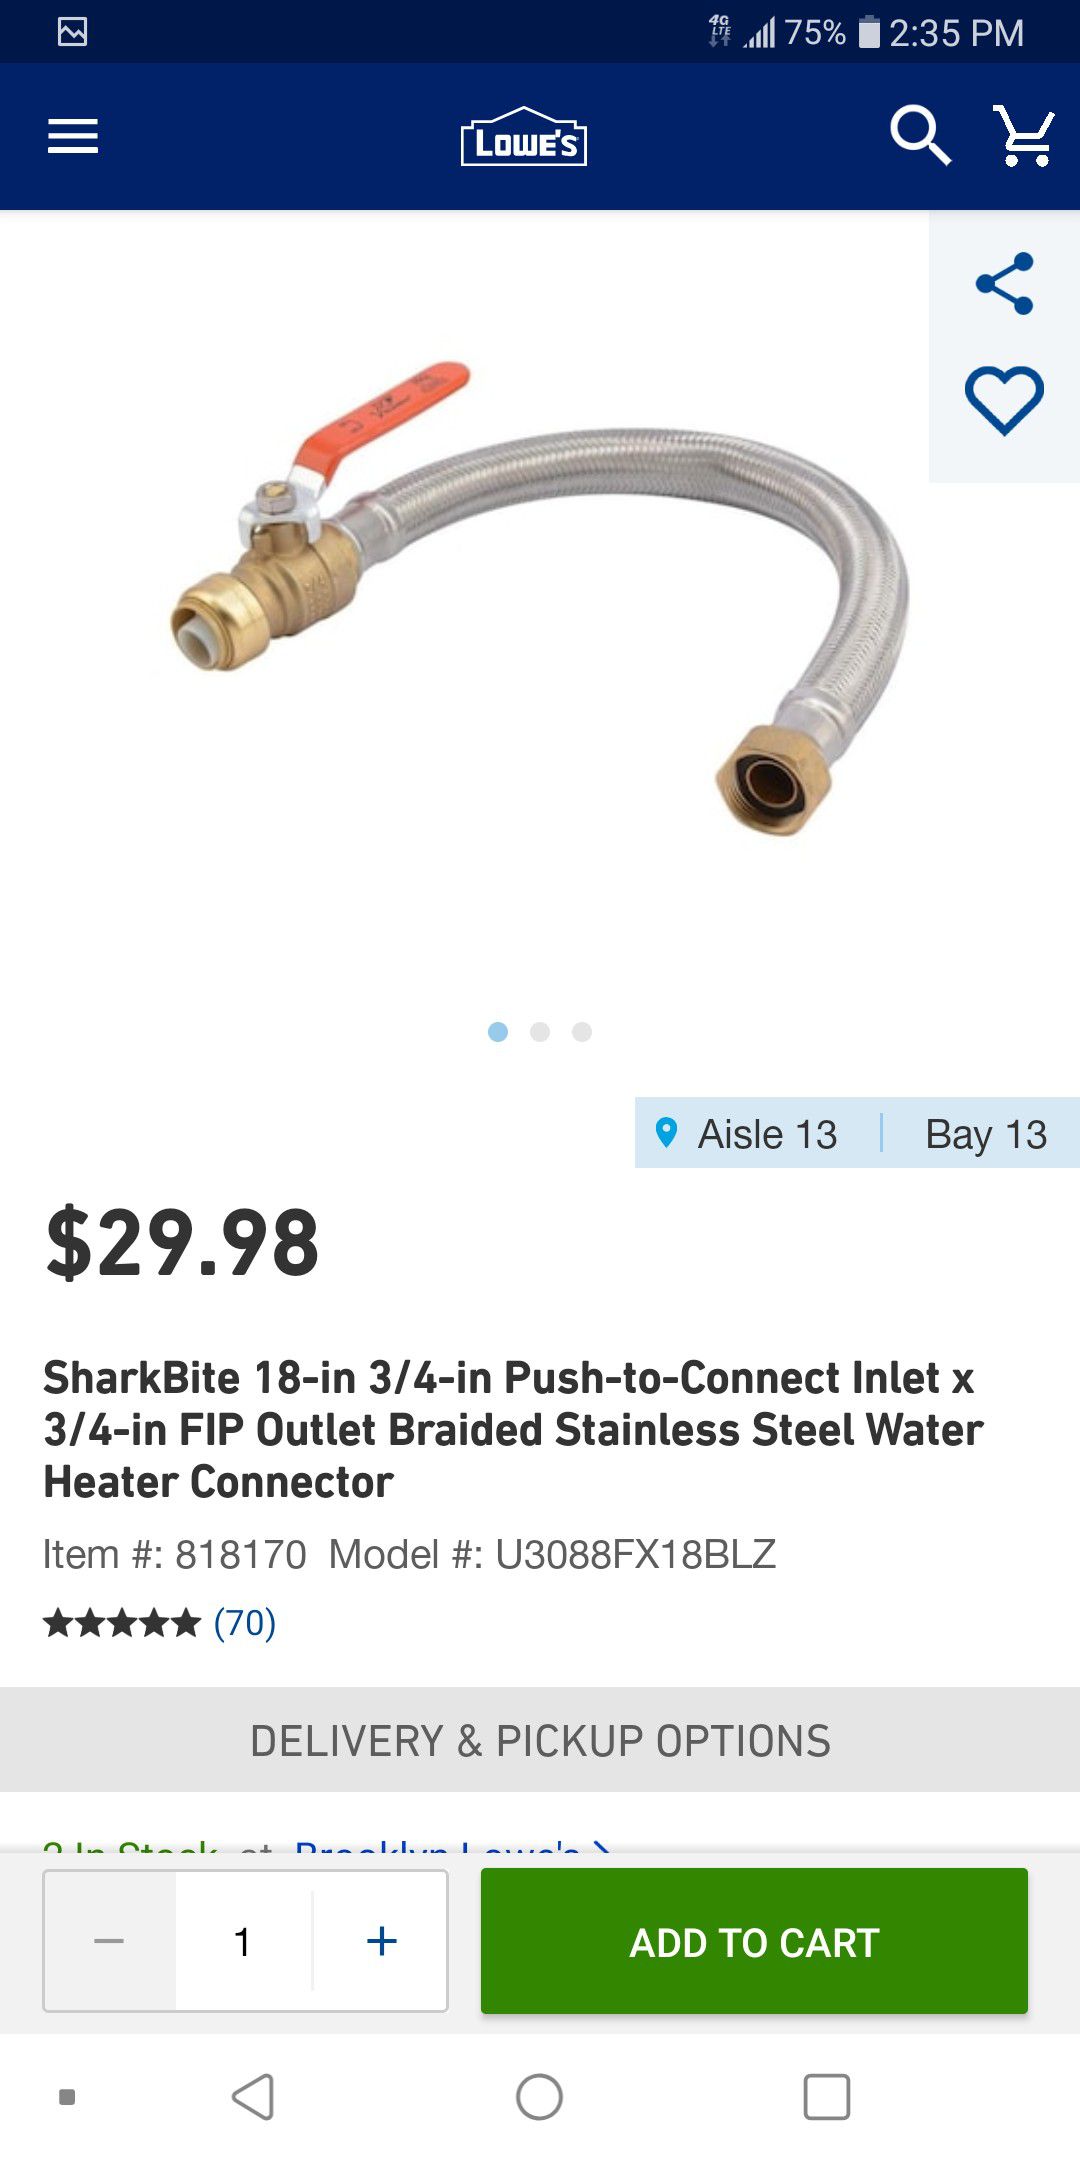 Water heater connect